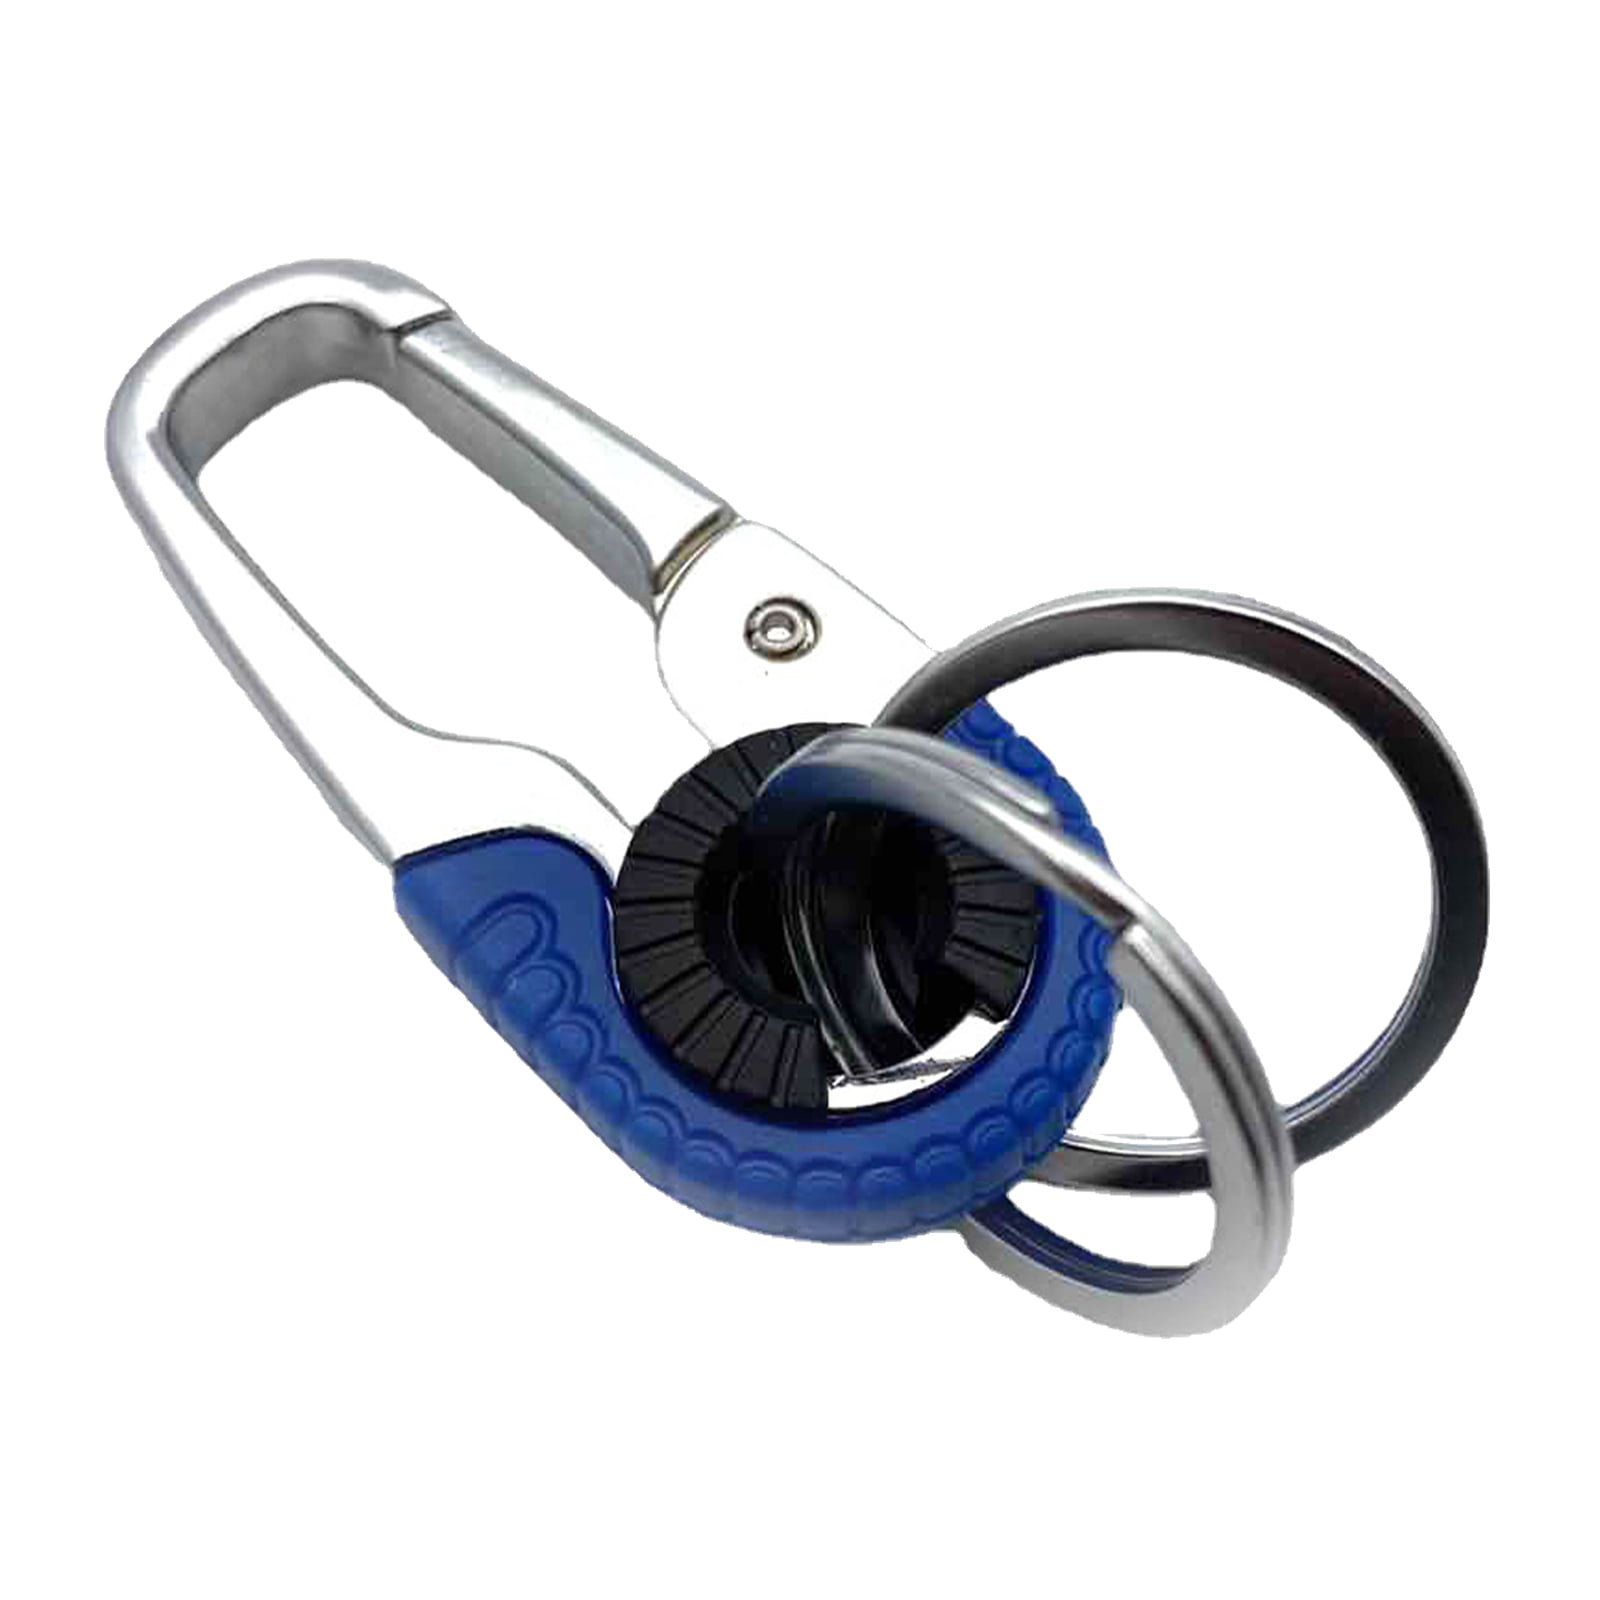 Details about   Keychain Key Ring Hook Outdoor Stainless Steel Buckle Carabiner Climbing Tool 